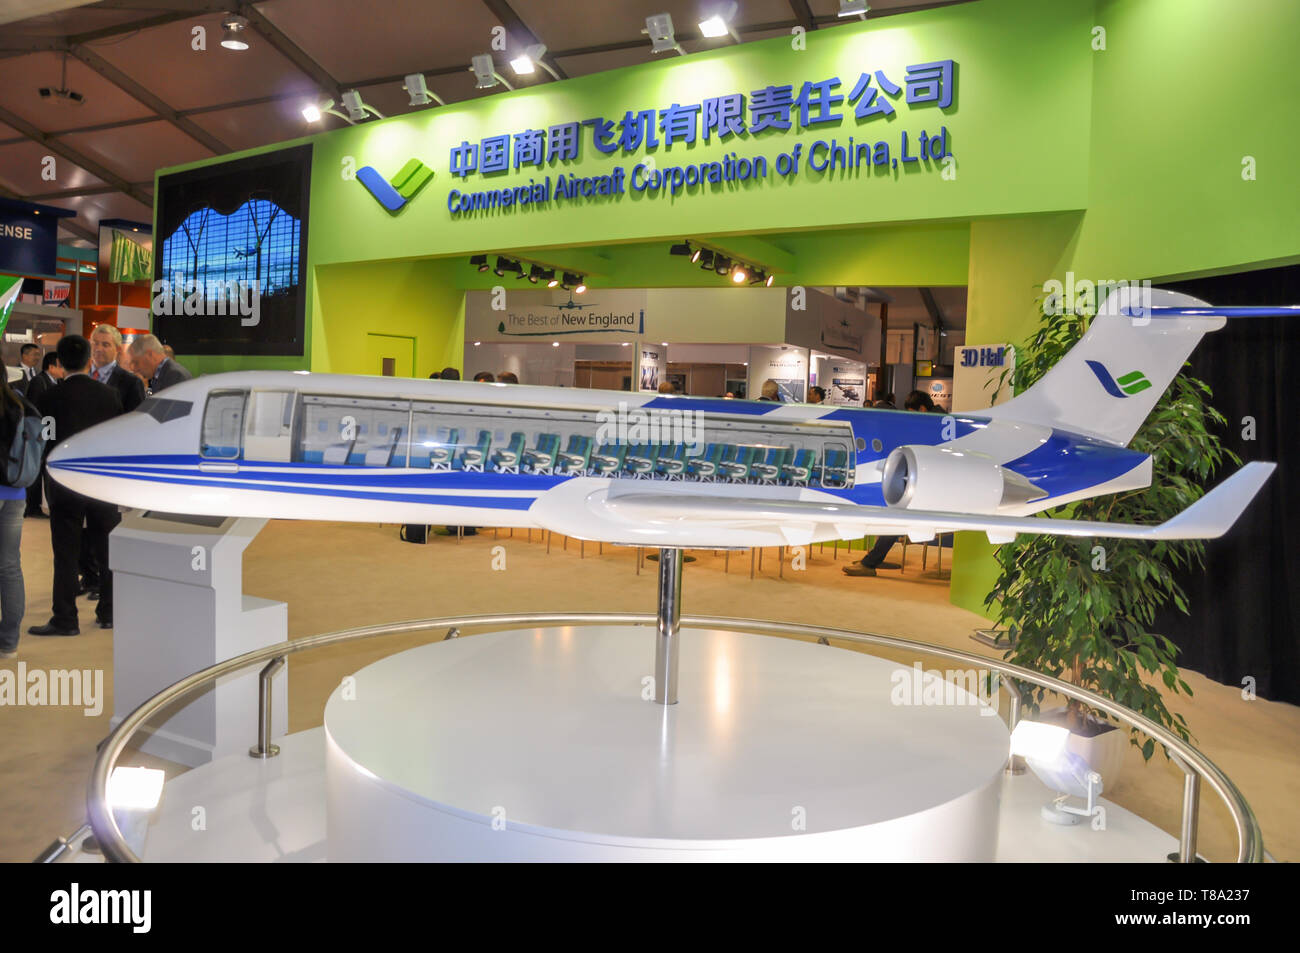 Commercial Aircraft Corporation of China Ltd, Comac stand at the Farnborough International Airshow industry trade market. Jet plane display model Stock Photo